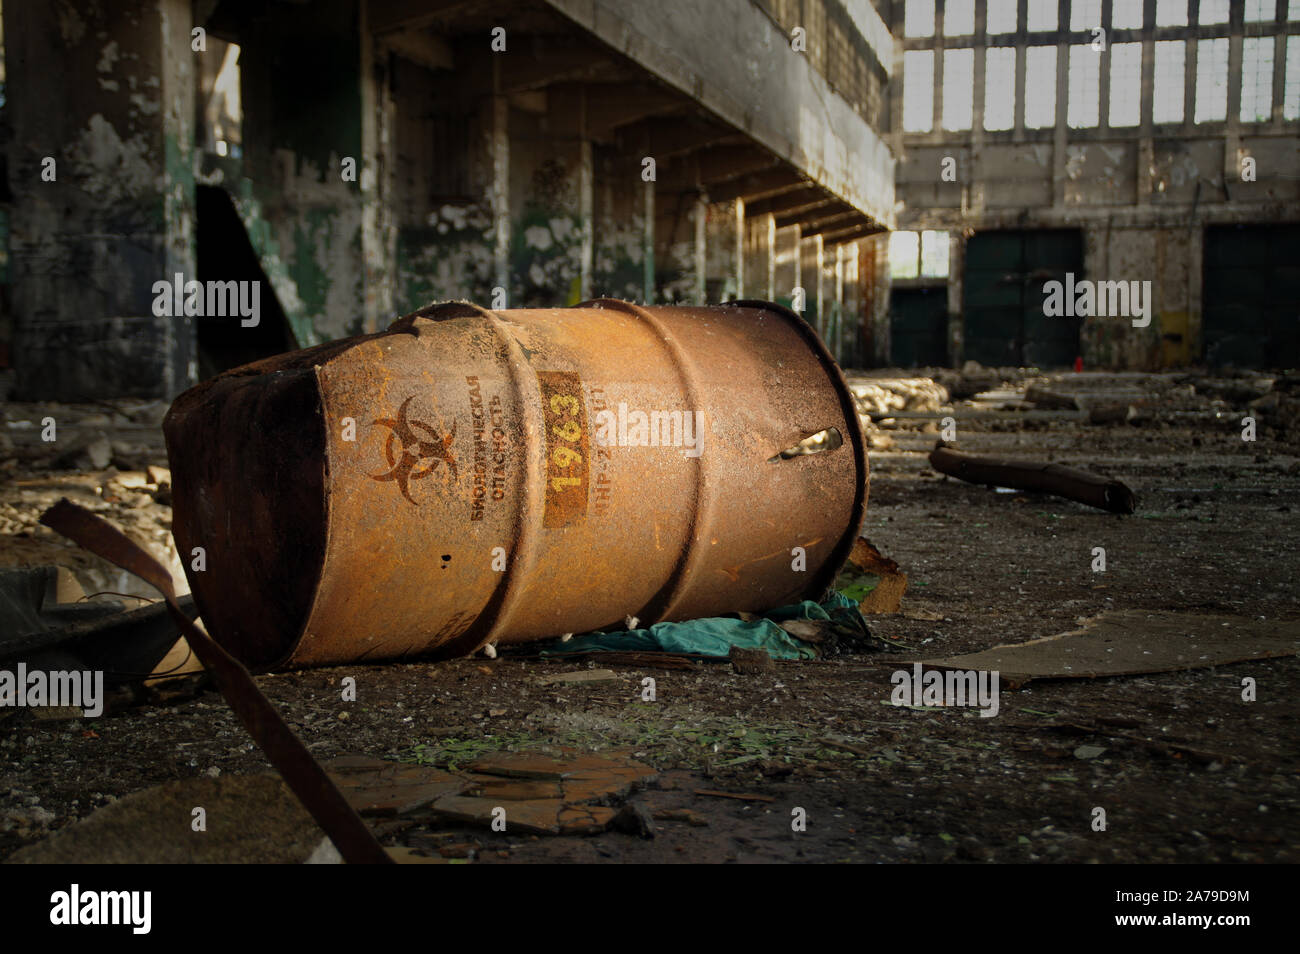 Radioactive warning on old rusty barrel in destroyed and forgotten building. Radiation symbol with russian alert on waste container after nuclear disa Stock Photo